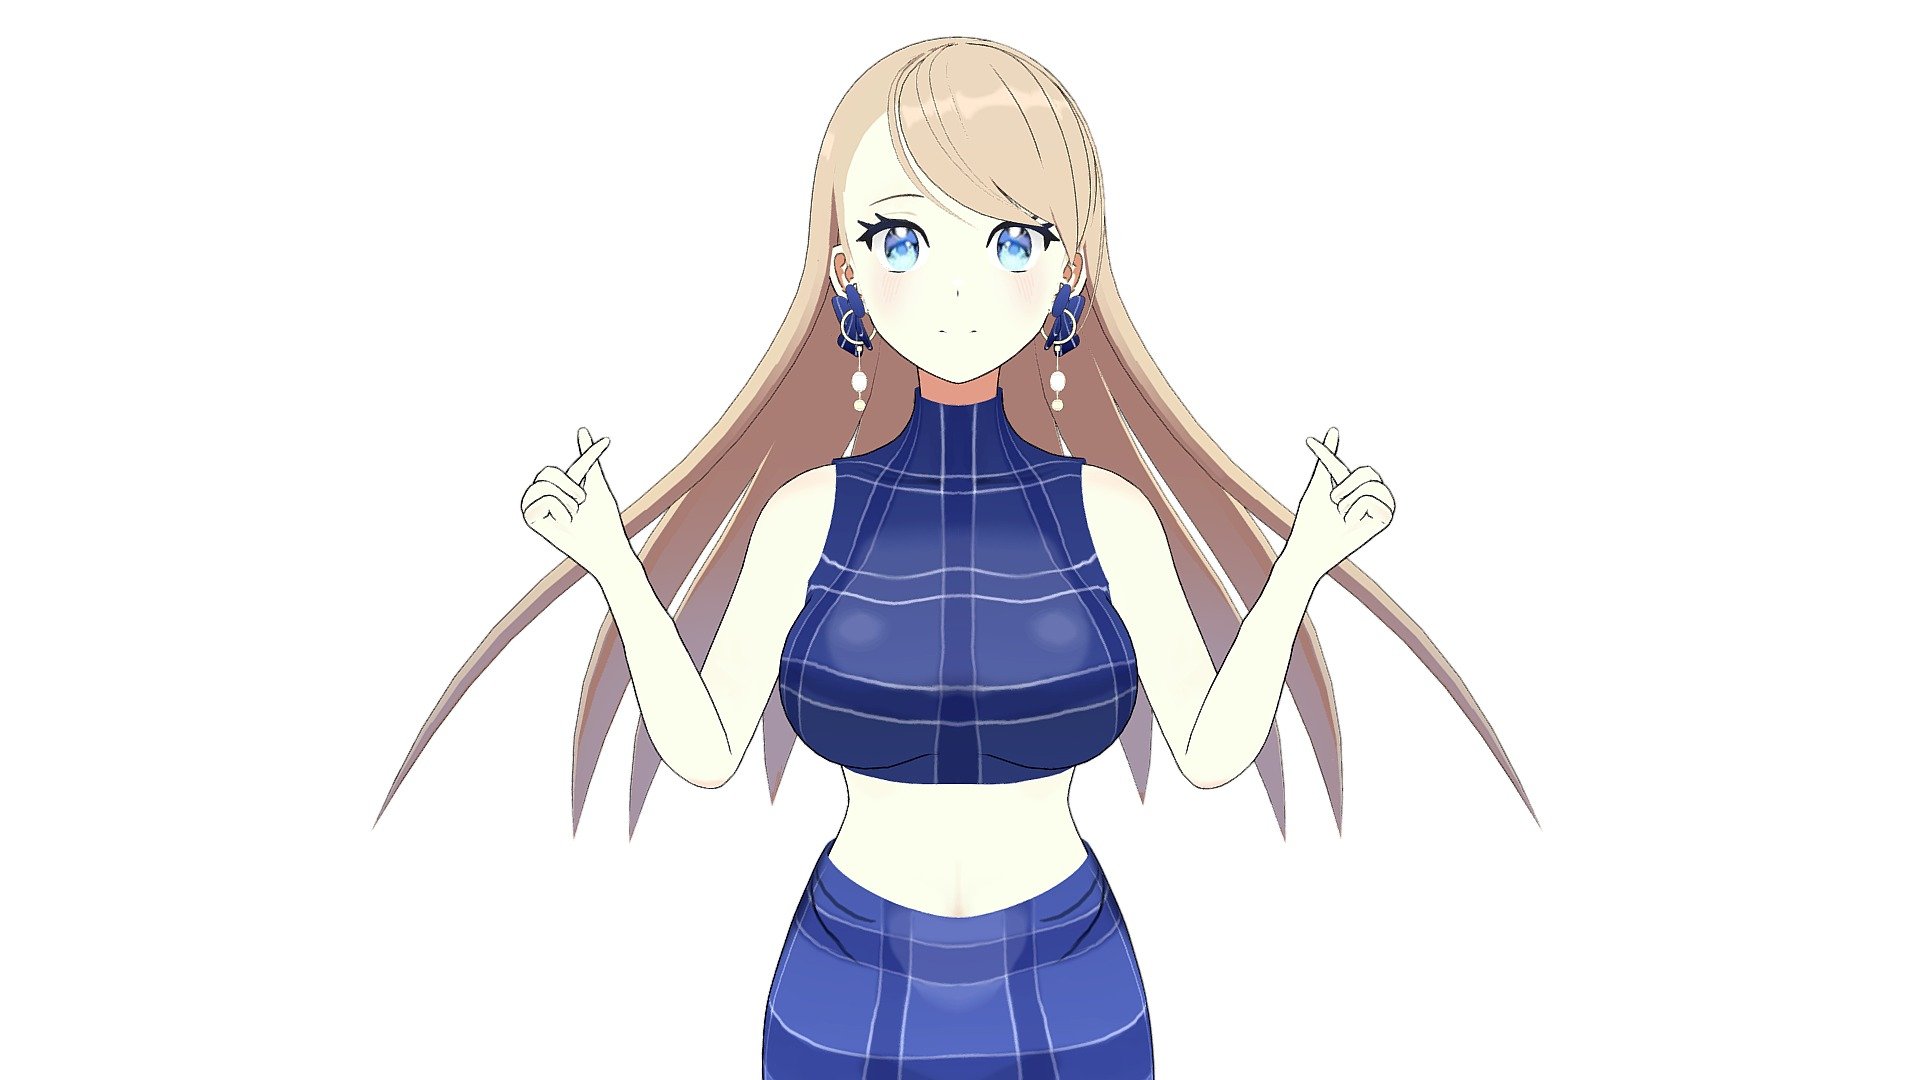 &ldquo;I'm a cheerful and curious anime girl! I have big and shiny eyes that convey a friendly and curious expression. I love wearing cute and comfortable clothes, like dresses and loose blouses. My personality is kind and friendly, and I love making new friends and exploring new places. I'm always ready for an adventure!